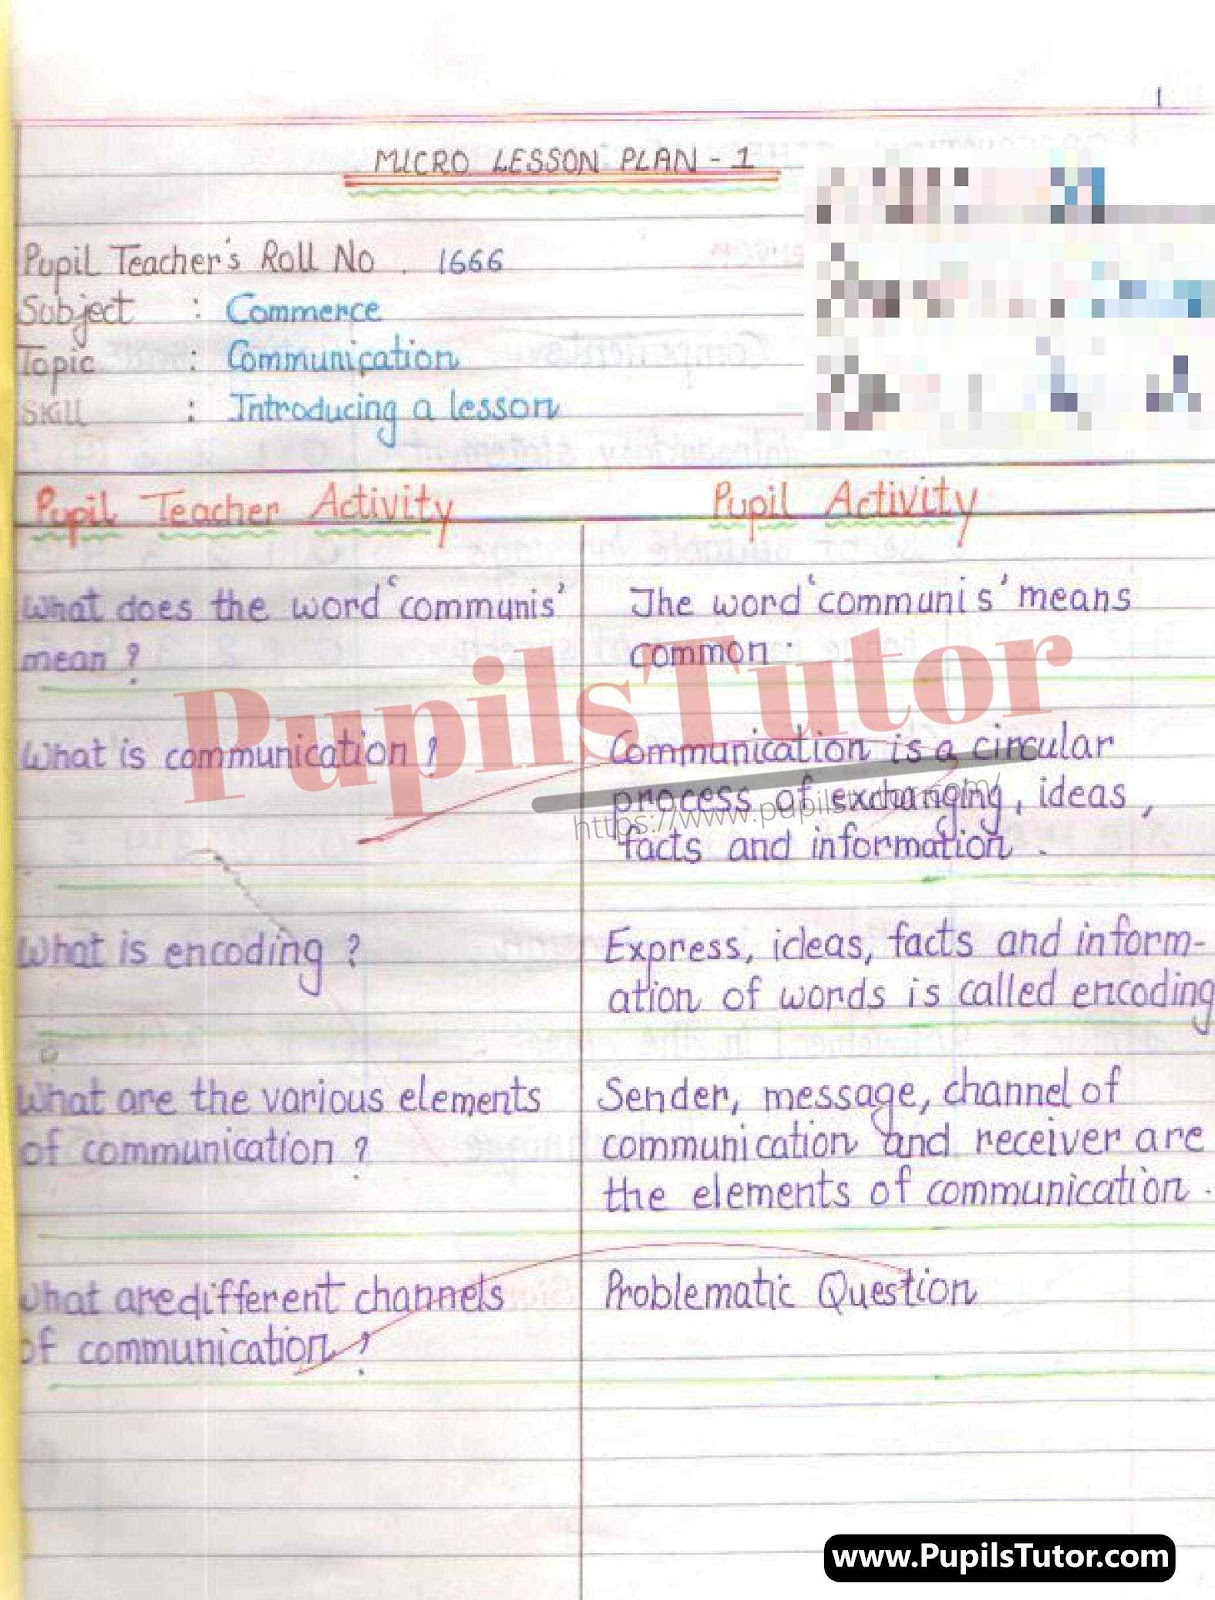 Micro Teaching Introduction Skill Business Studies Lesson Plan For Class 11 On Channels Of Communication – (Page And Image Number 1) – Pupils Tutor